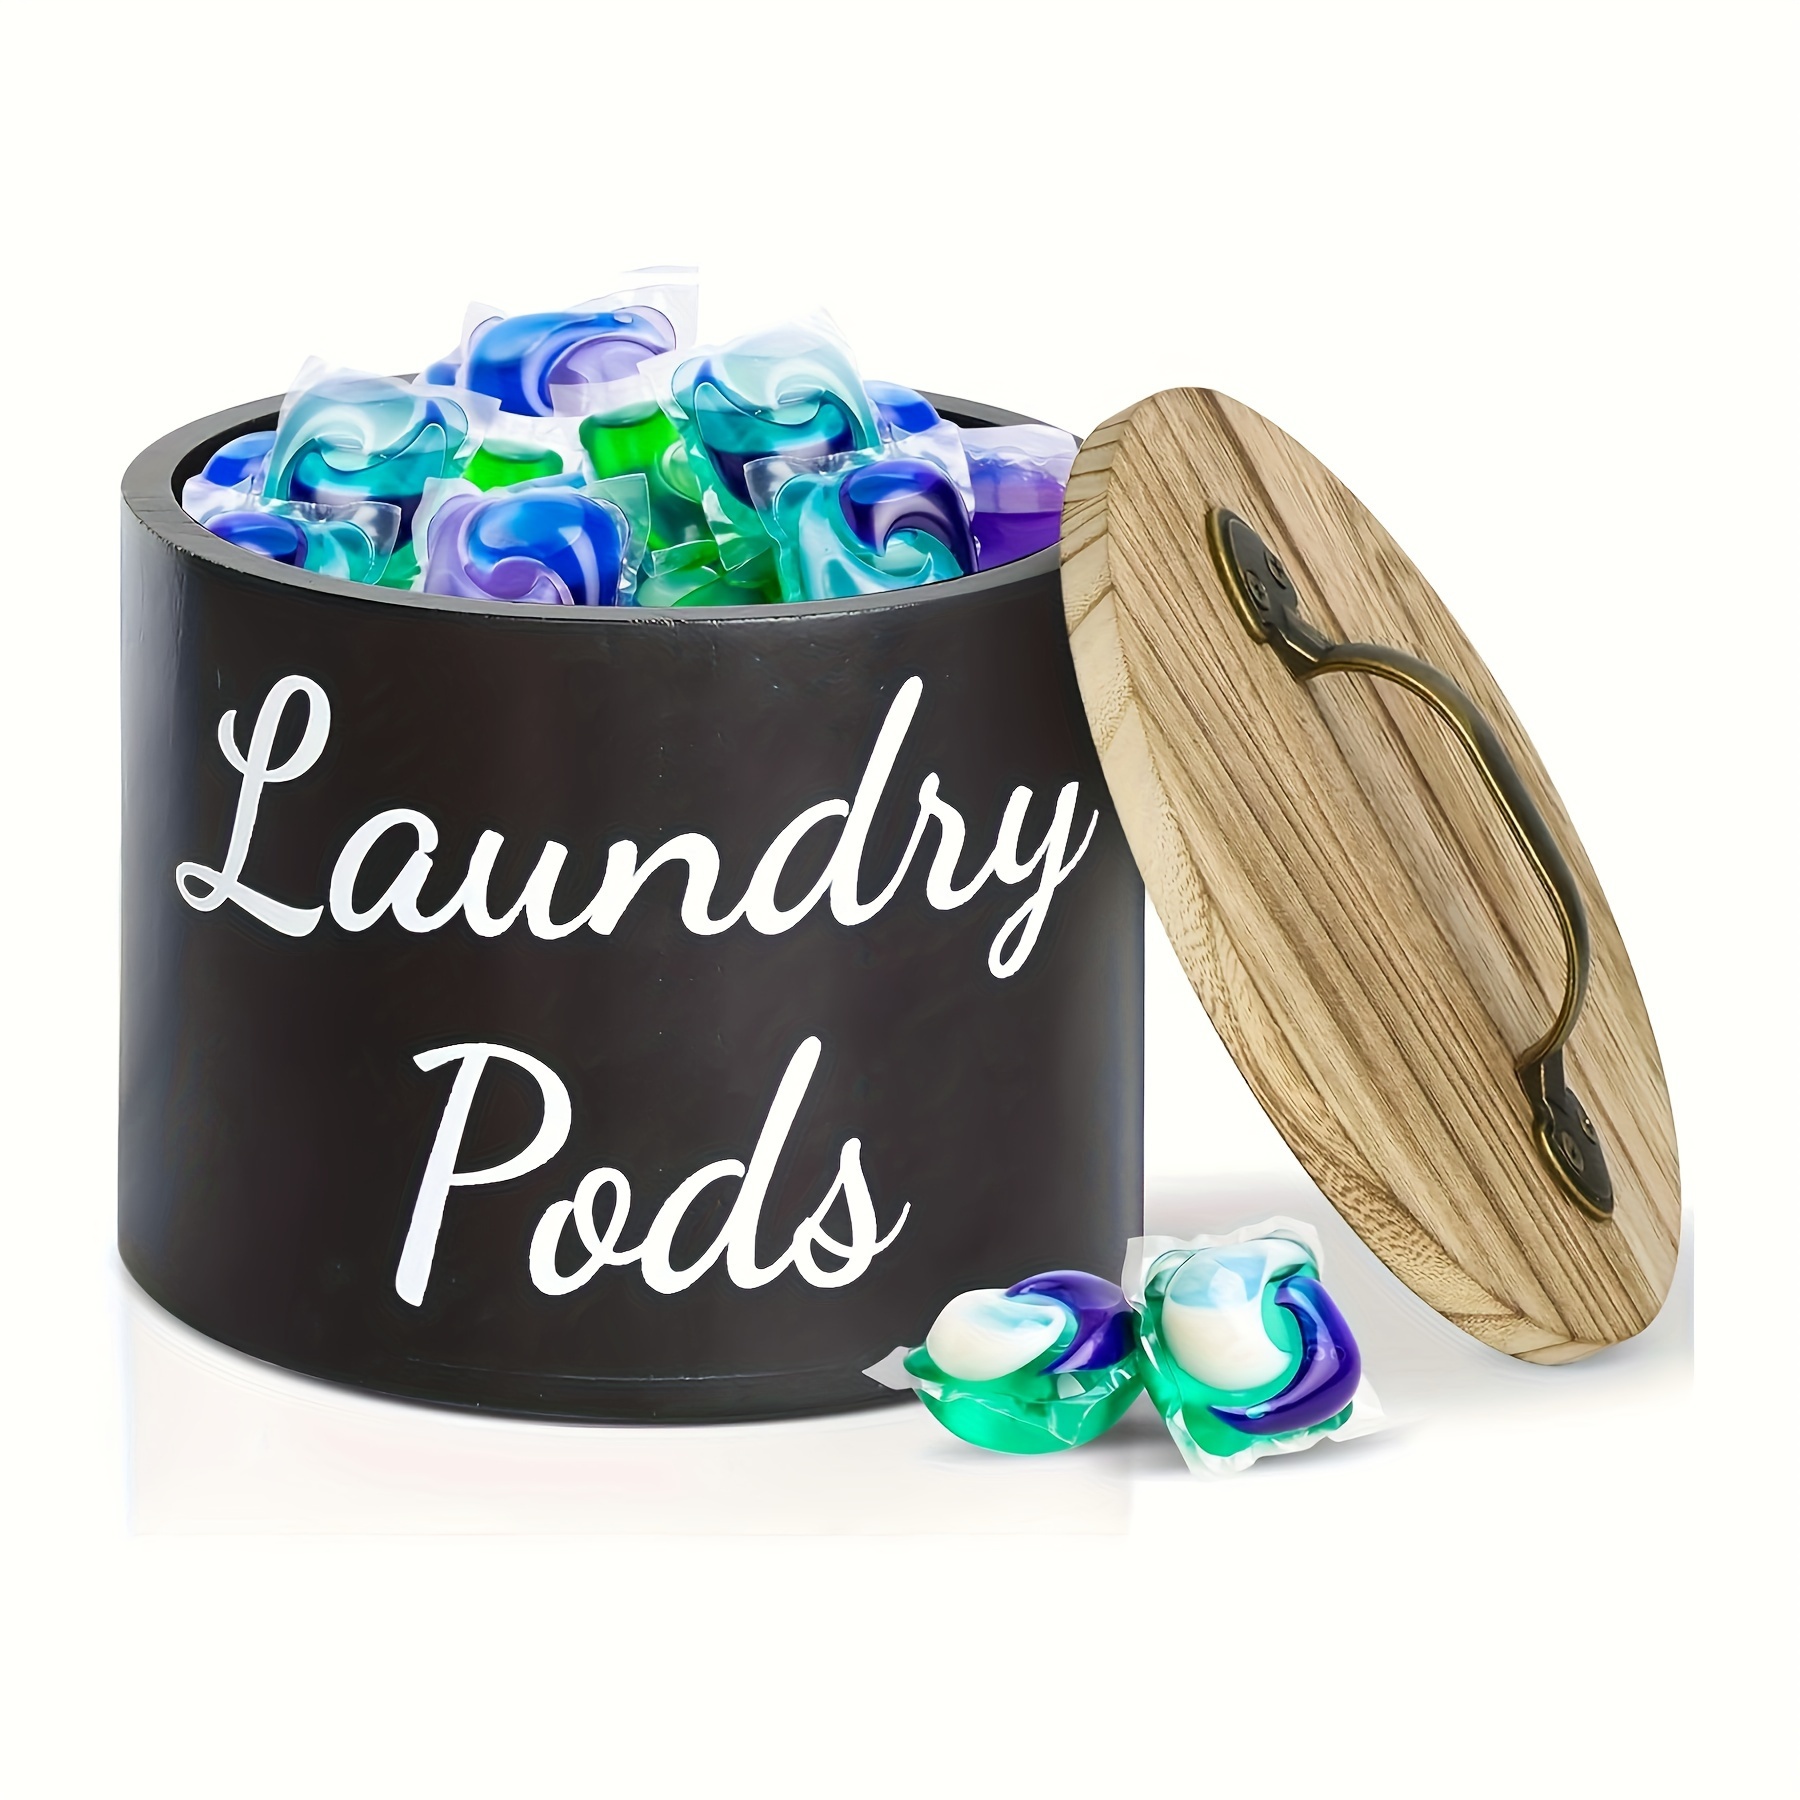 

1pc Laundry Pods Container With Lid, For Laundry Room Organization, Wood Dryer Sheet Holder, Laundry Pod Storage, Fabric Softener Dispenser, Farmhouse Laundry Room Decor